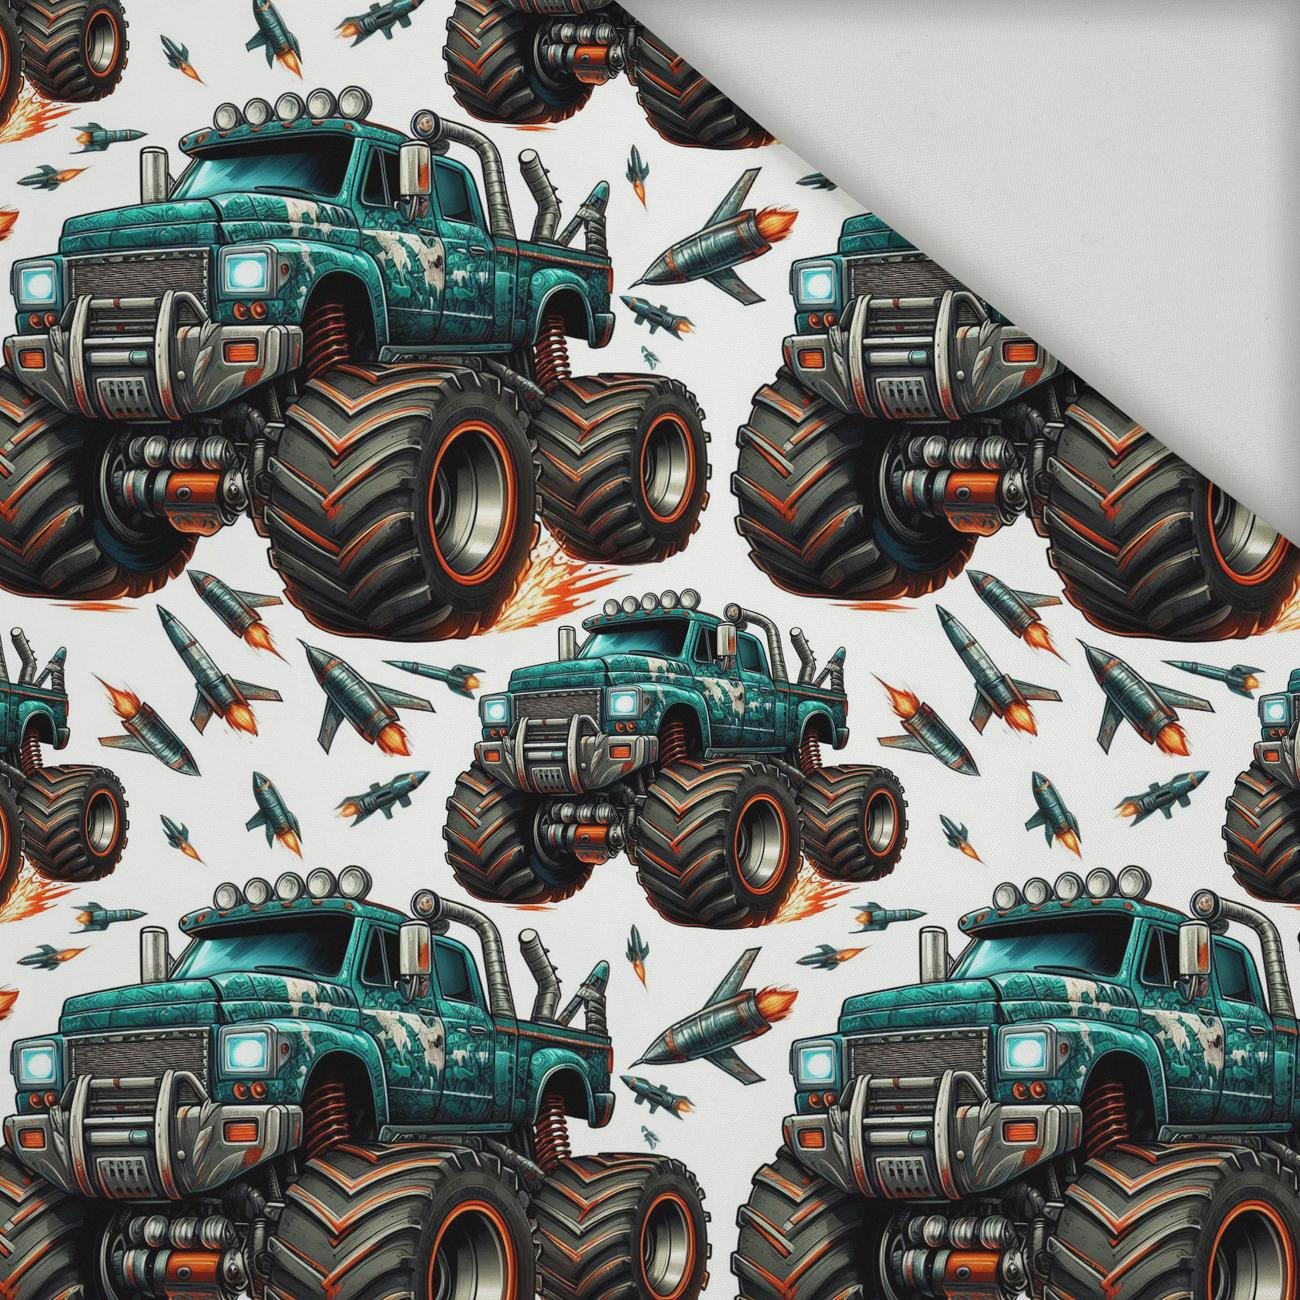 MONSTER TRUCK PAT. 2 - quick-drying woven fabric